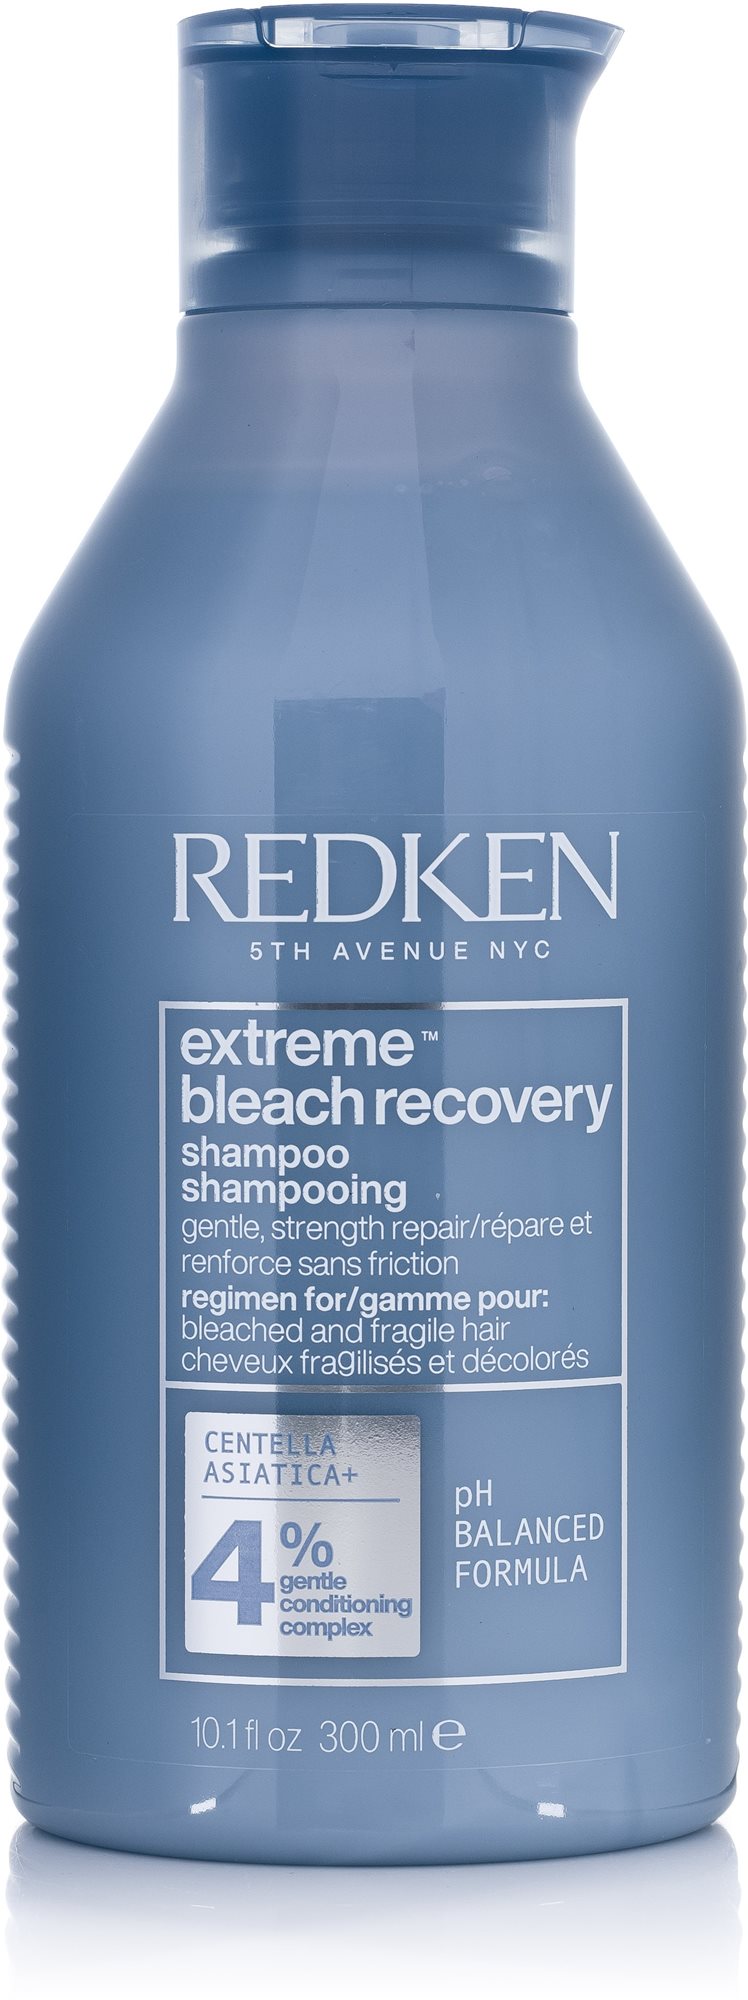 REDKEN Extreme Bleach Recovery Shampoo 300 ml